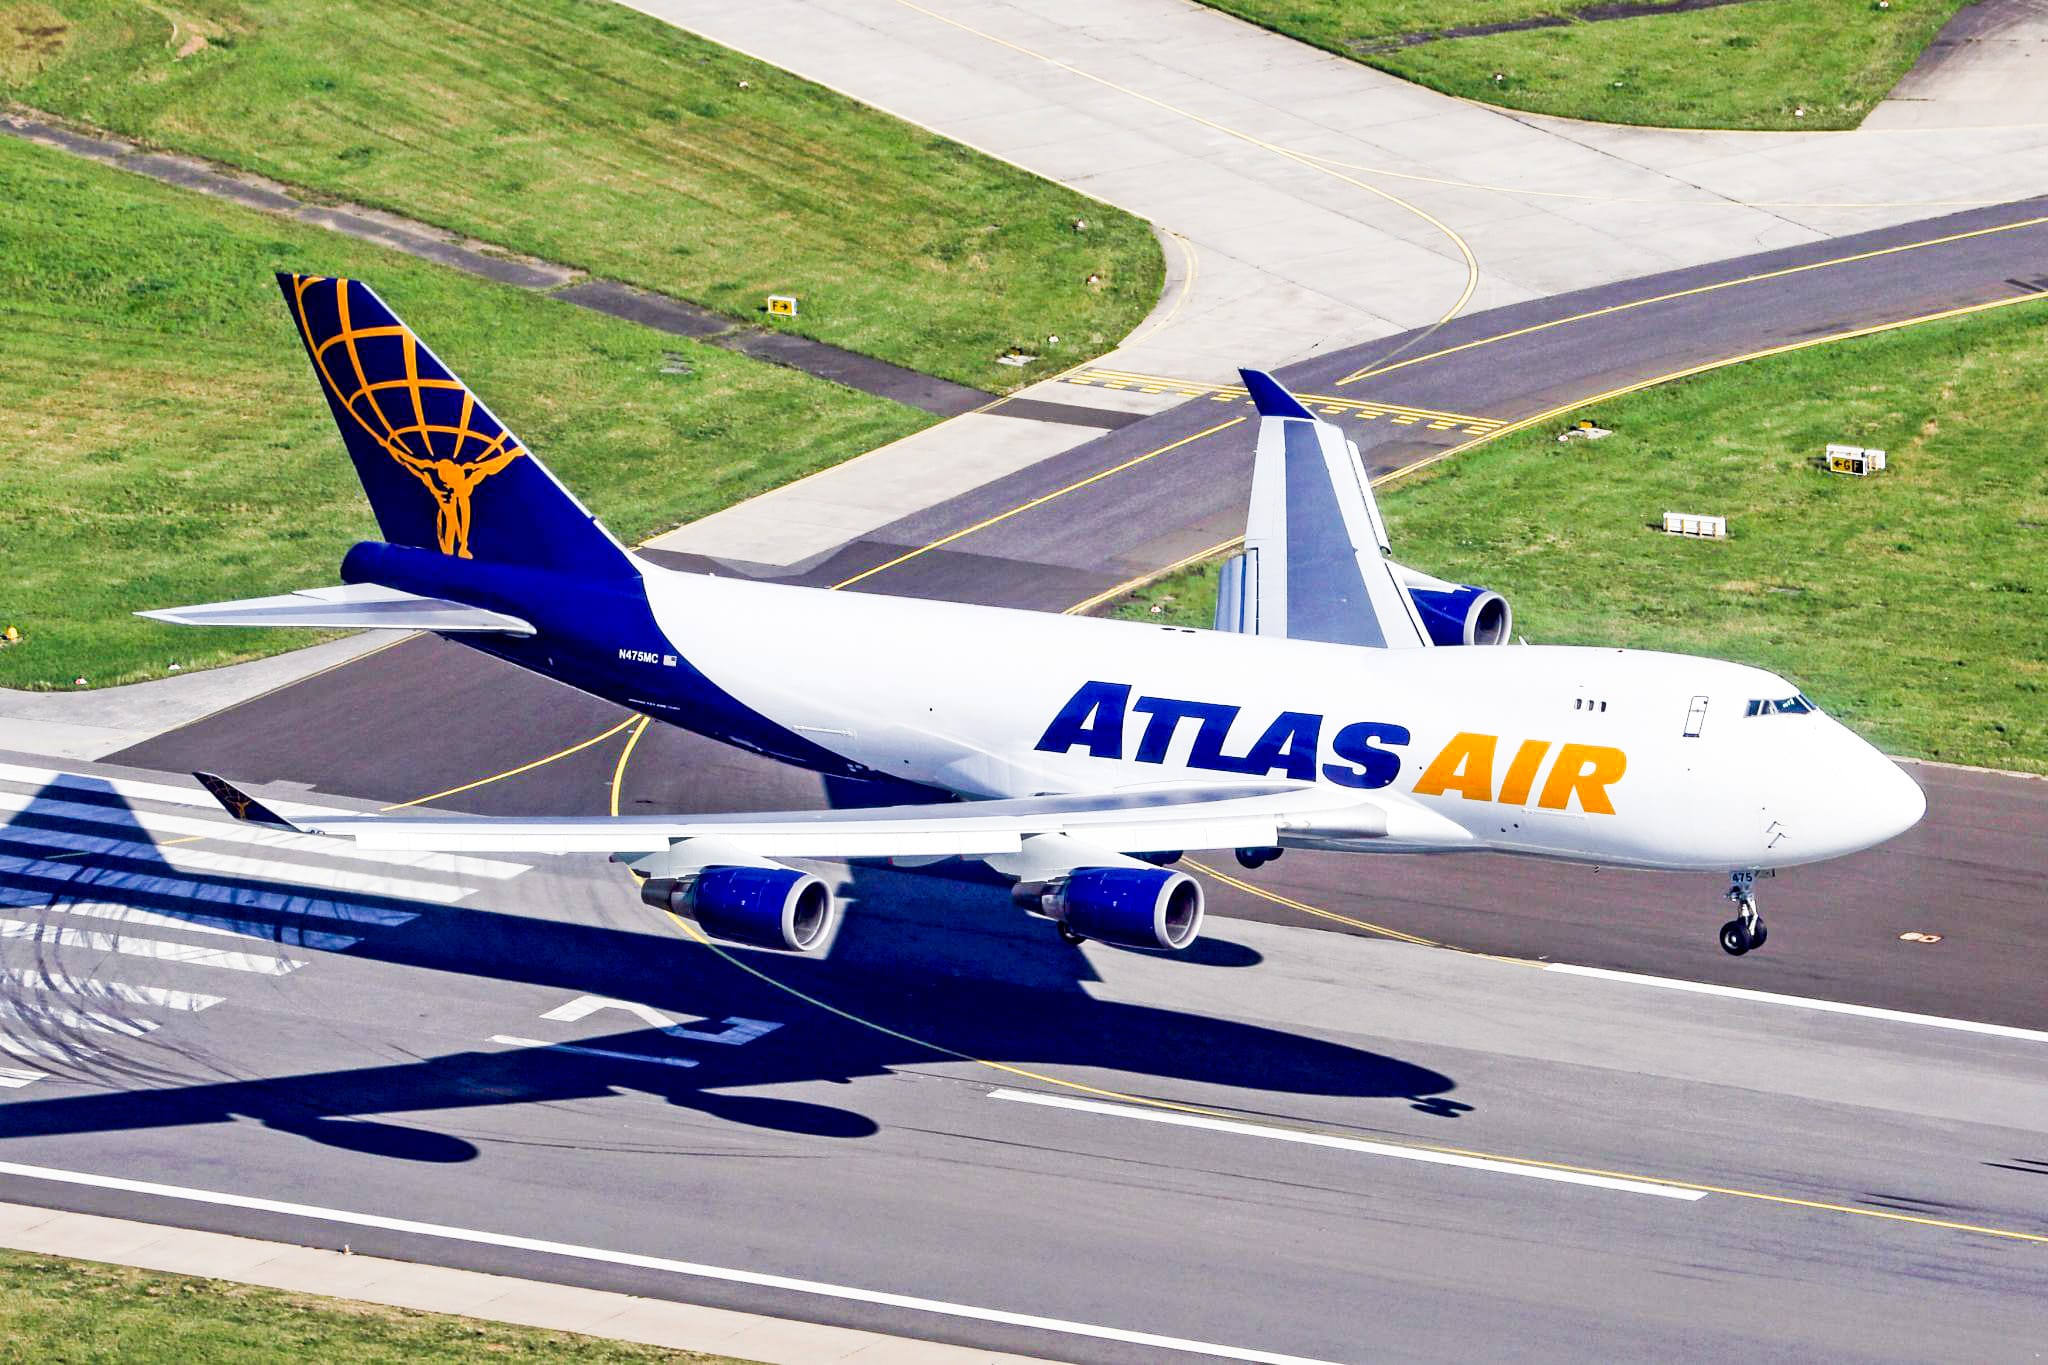 Flexport grows 747-400F ops with Atlas Air